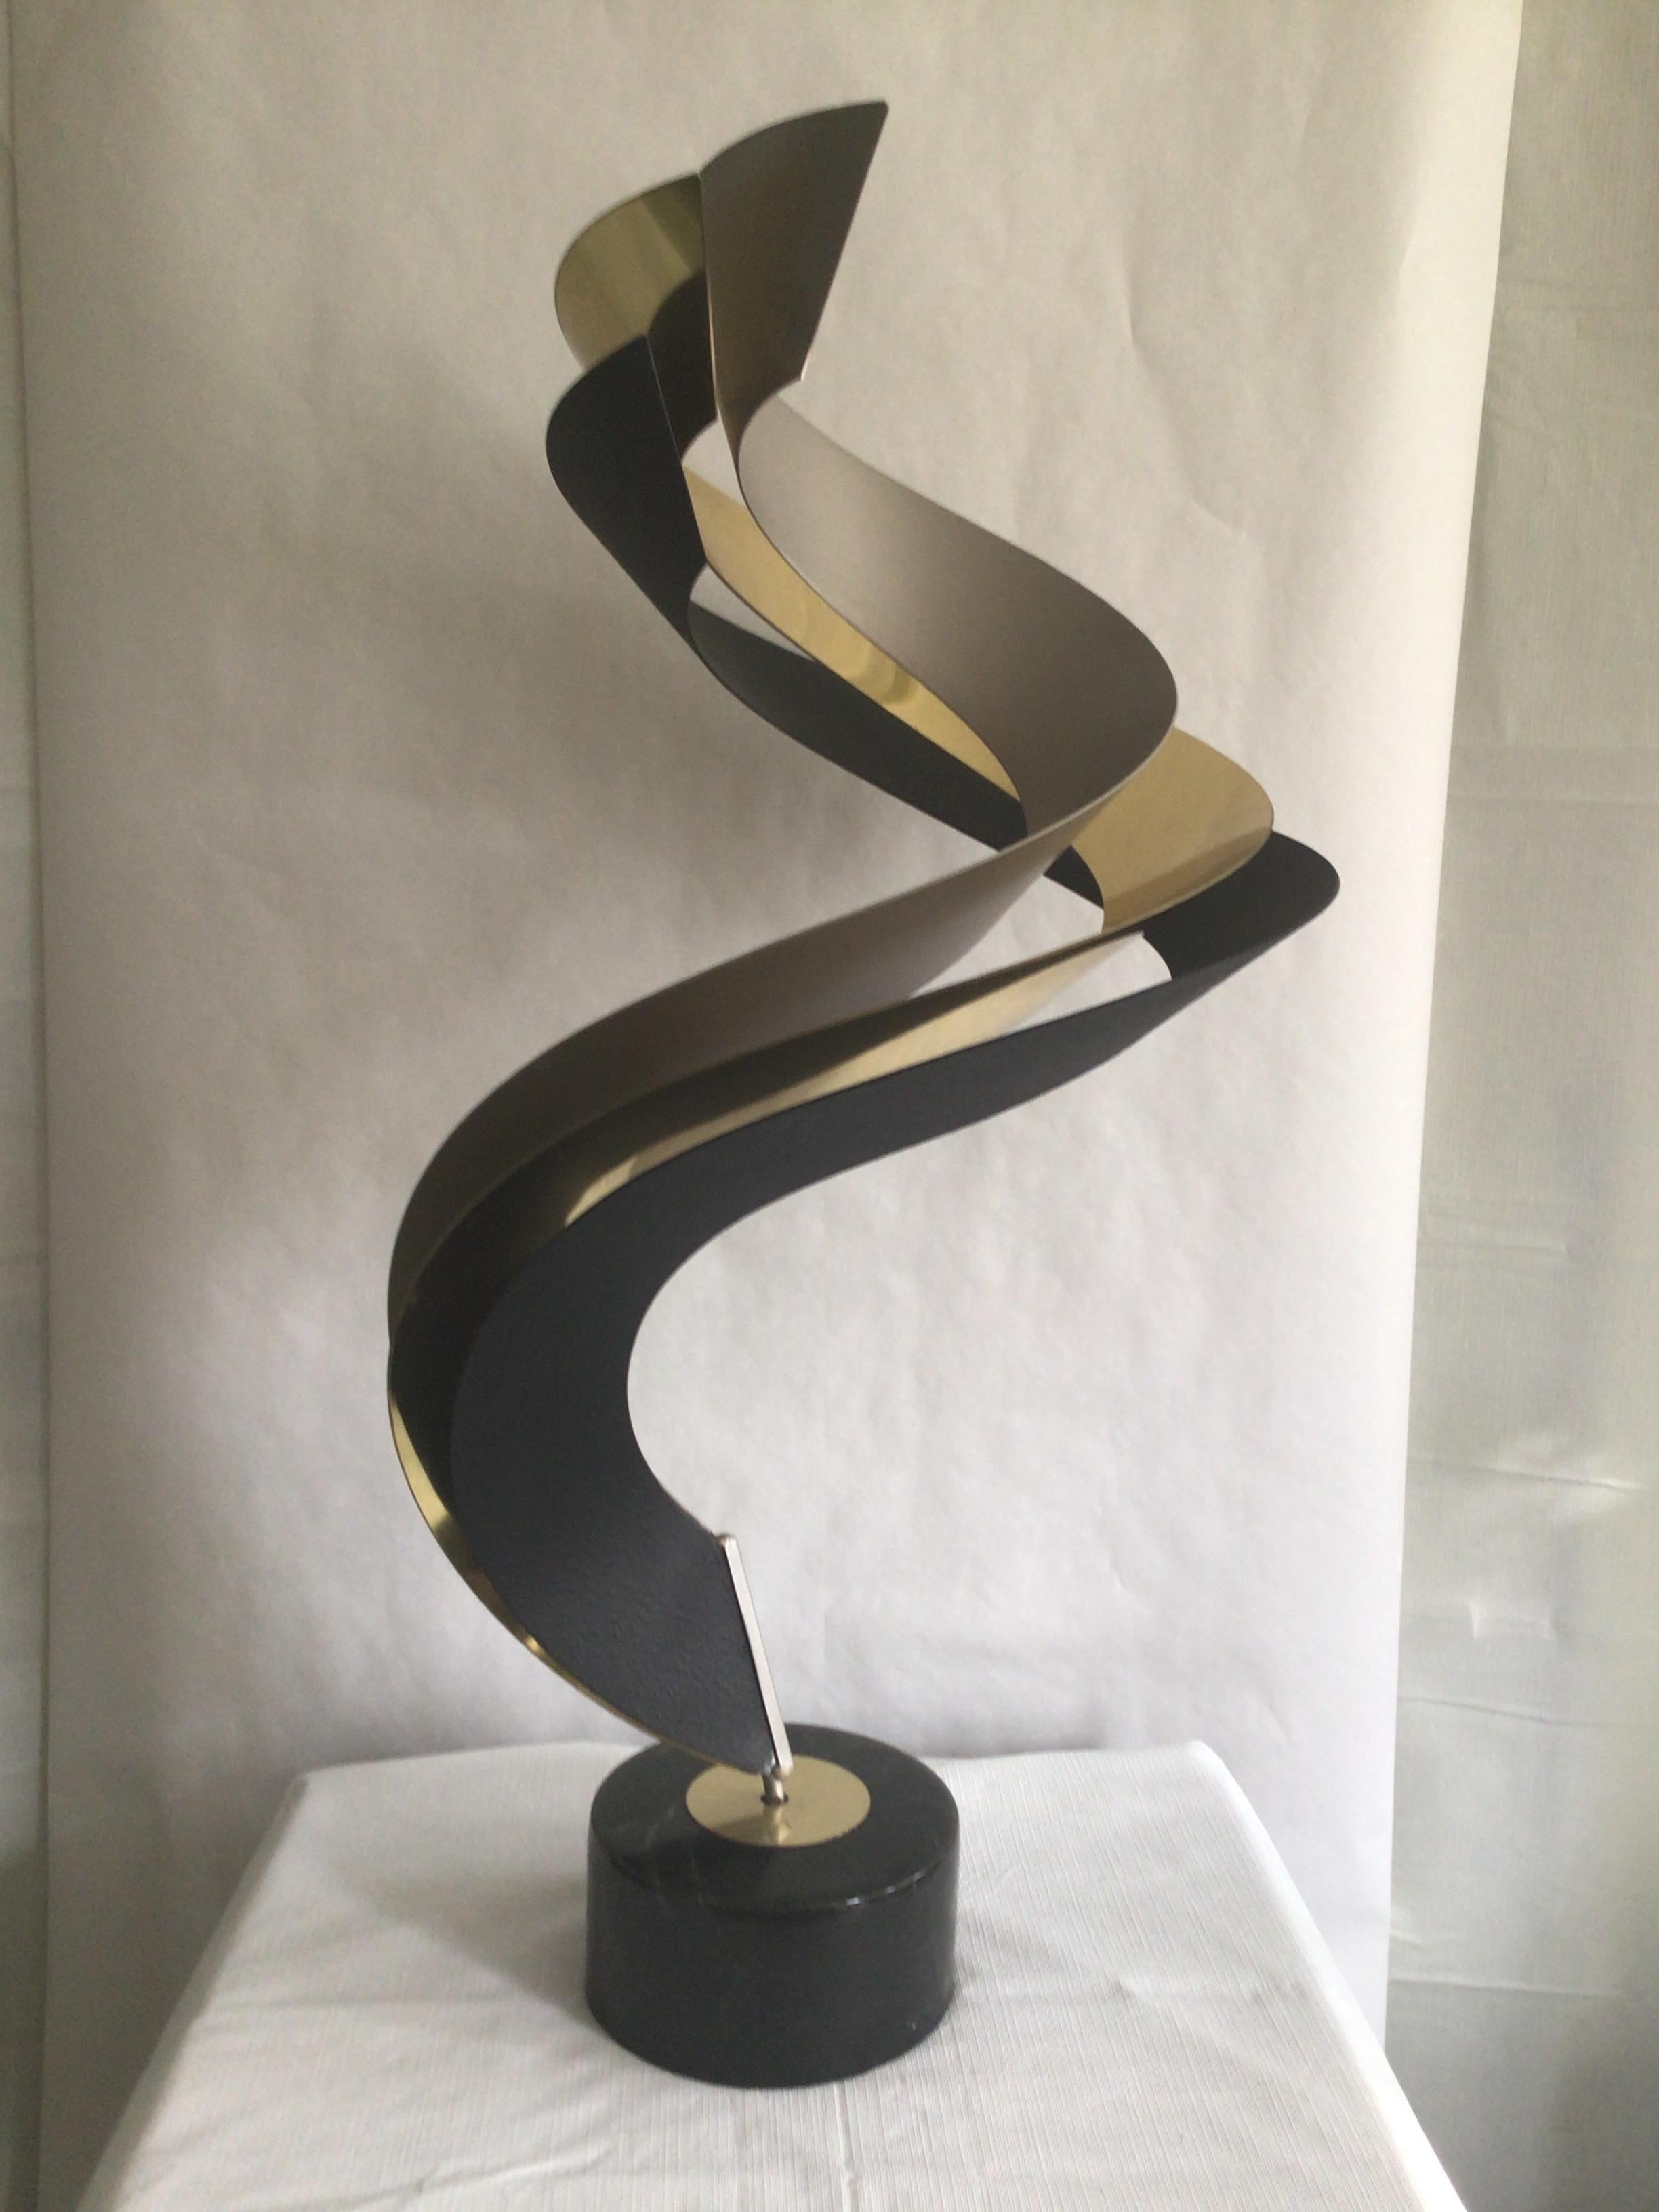 1980s brass steel and aluminum Swirled sculpture on Swivel base
Composition base swivels and turns 360degrees - weighted base.